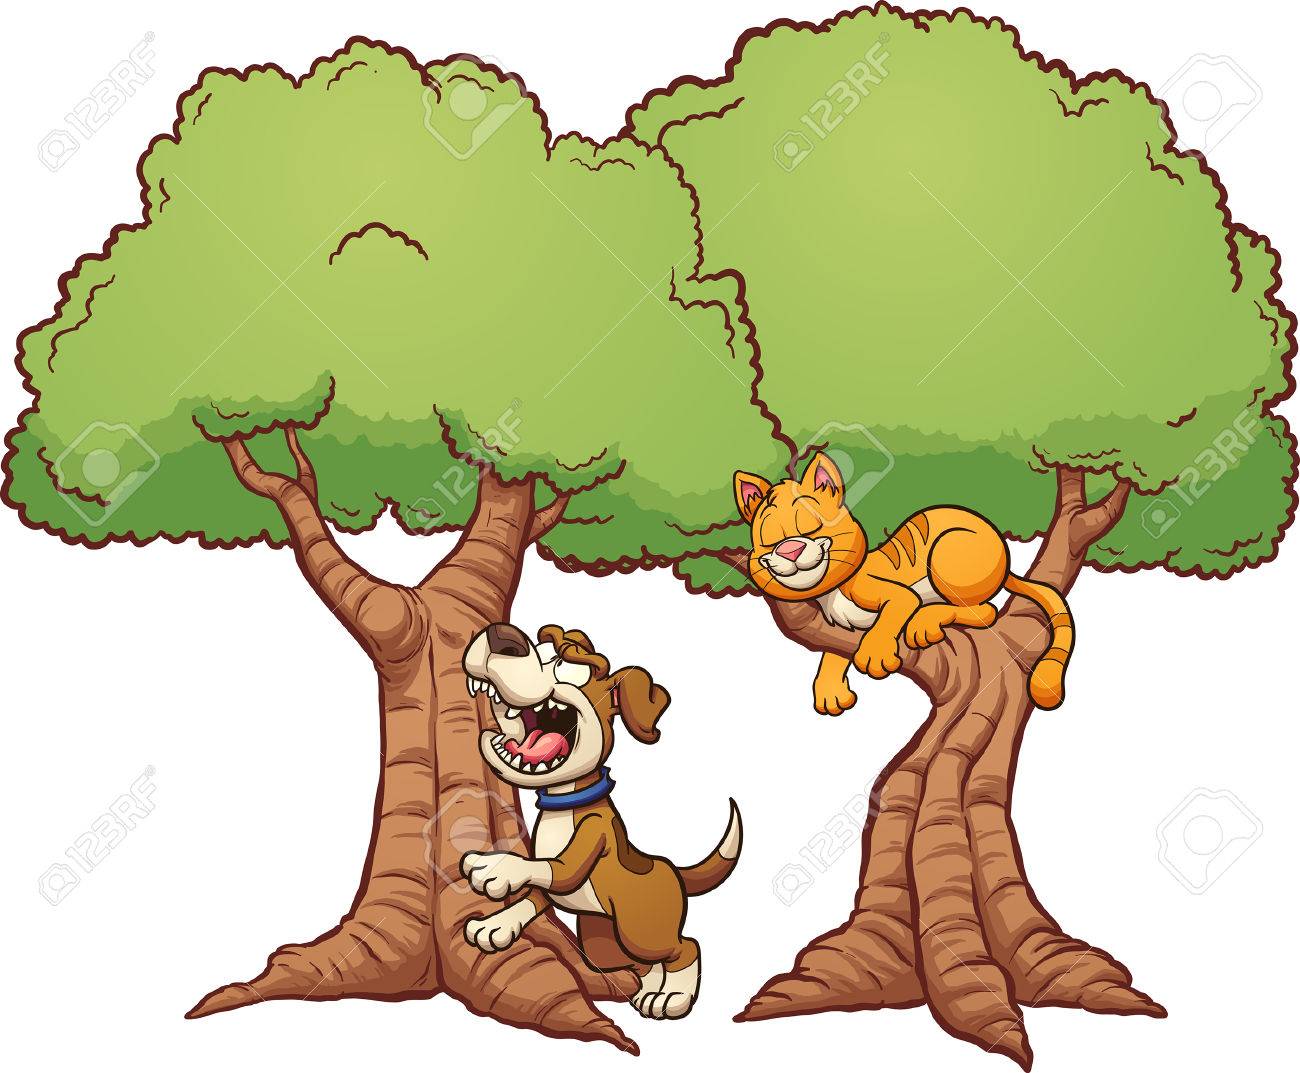 72320426-dog-barking-up-the-wrong-tree-clip-art-illustration-with-simple-gradients-each-element-on-a-separate.jpg